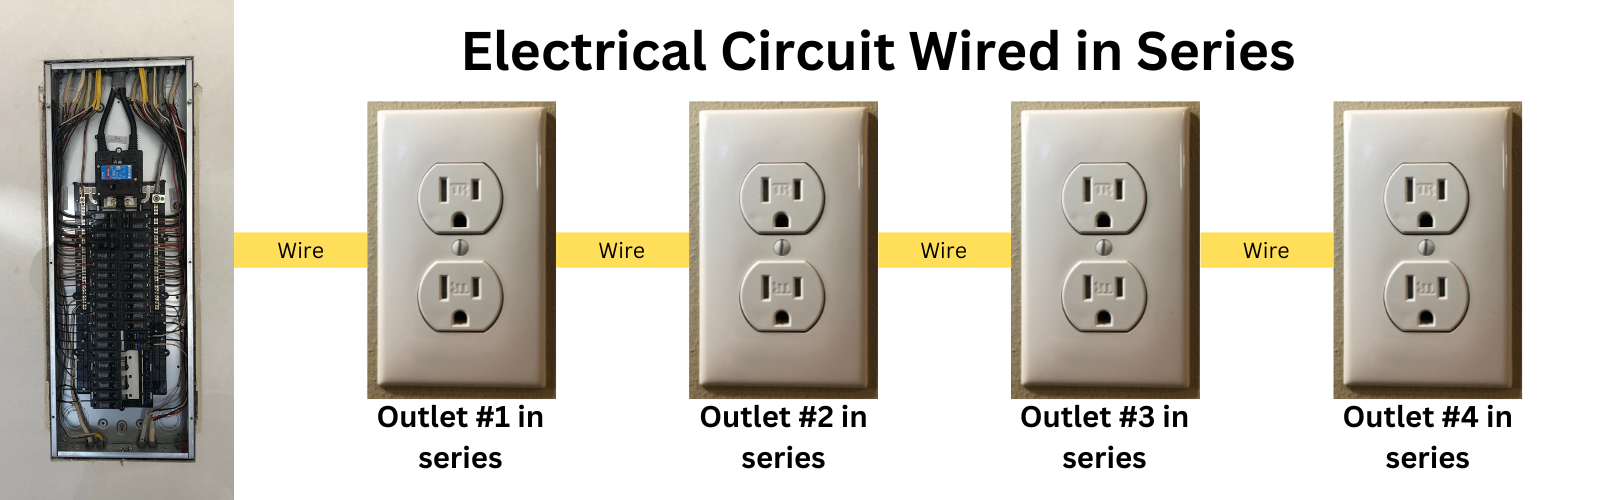 Electrical Circuit Wired in Series